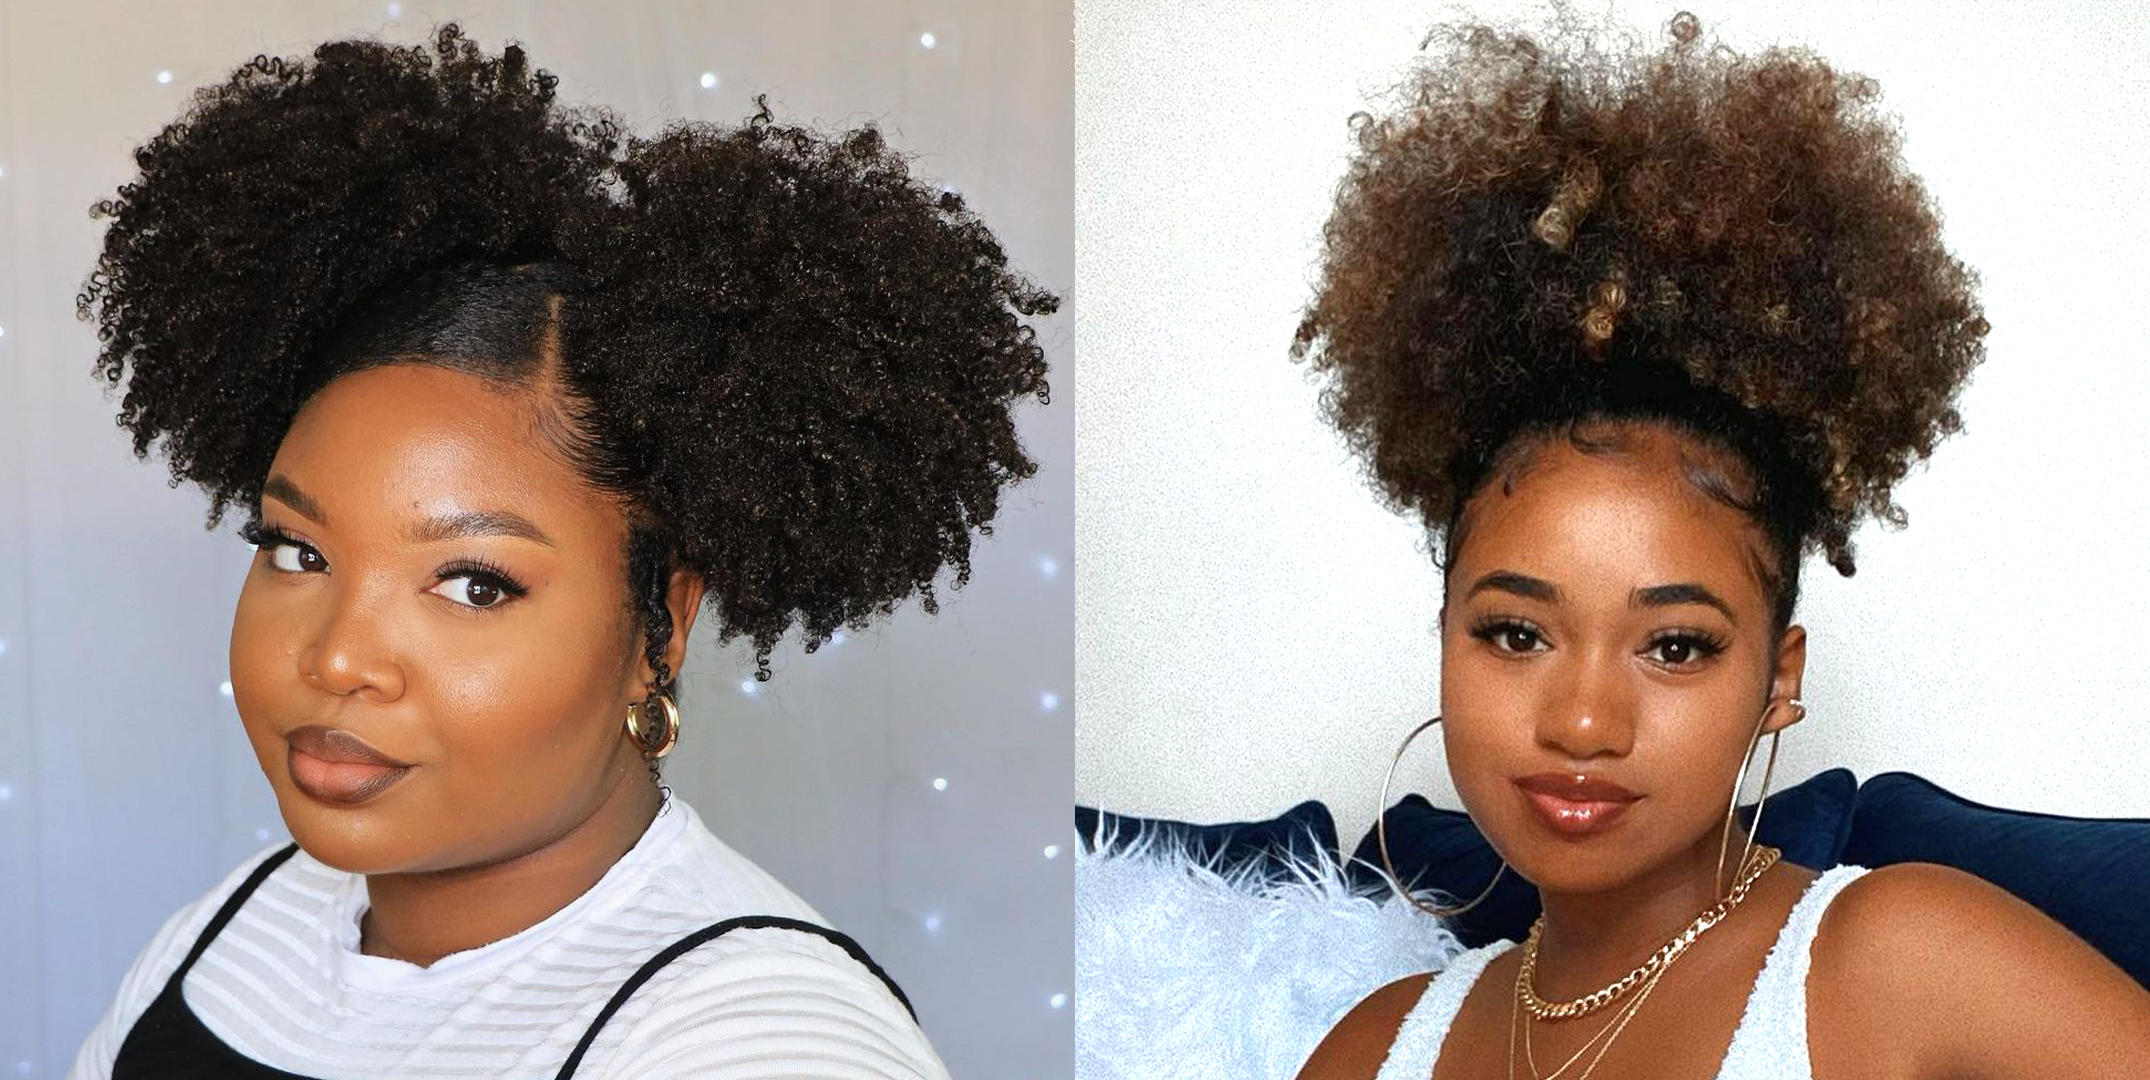 How To Do Puff Hairstyles: Stepwise DIY Tutorial With Pictures